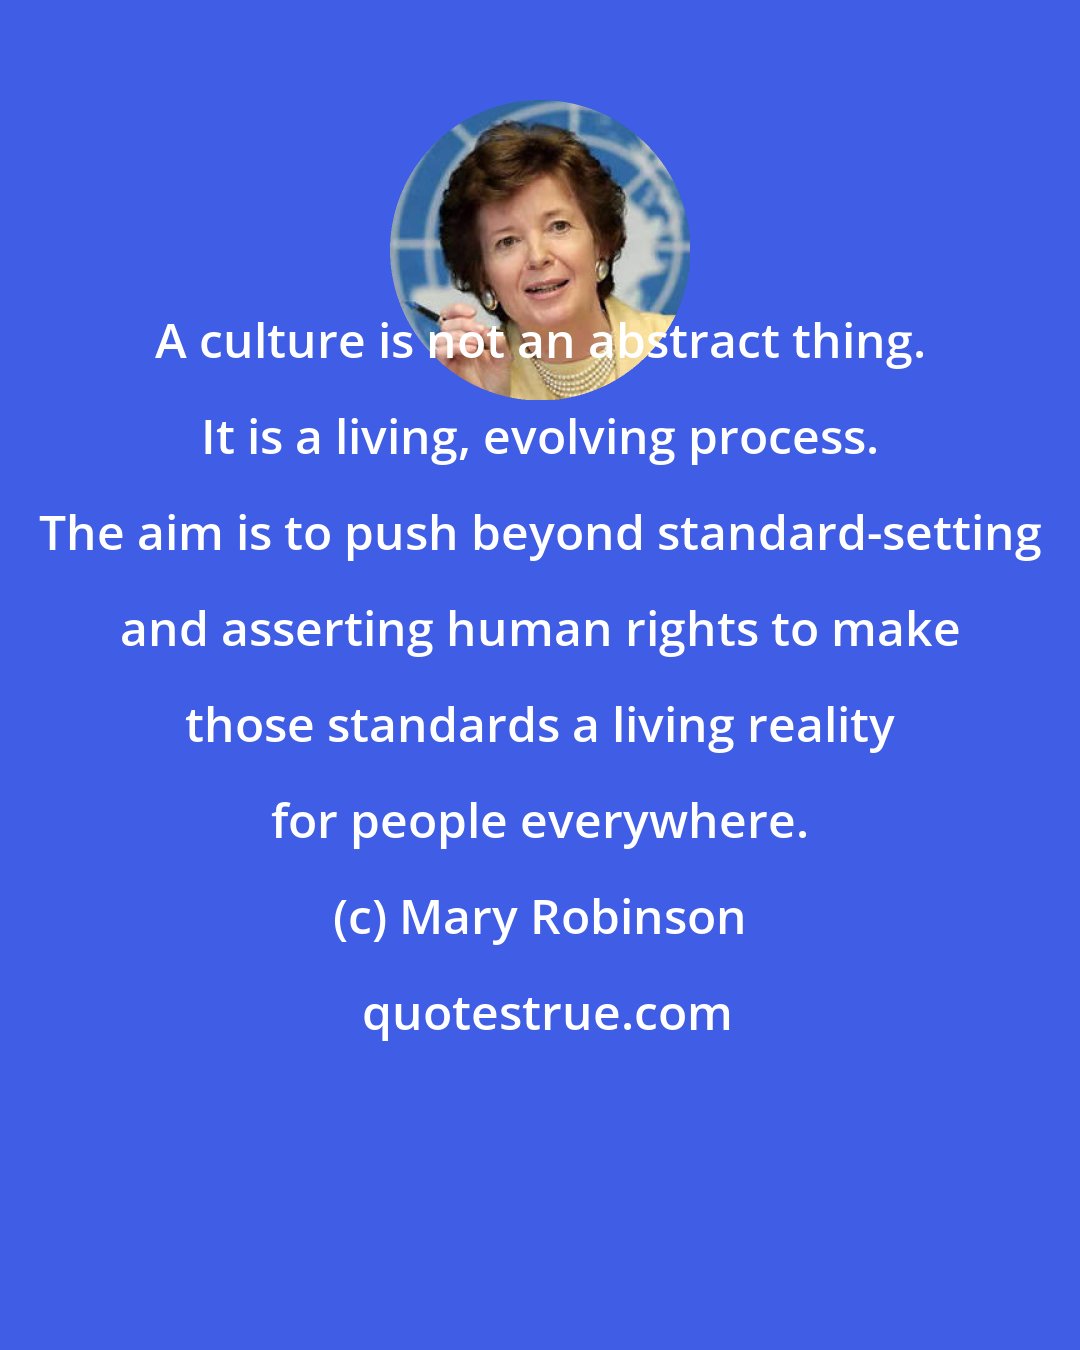 Mary Robinson: A culture is not an abstract thing. It is a living, evolving process. The aim is to push beyond standard-setting and asserting human rights to make those standards a living reality for people everywhere.